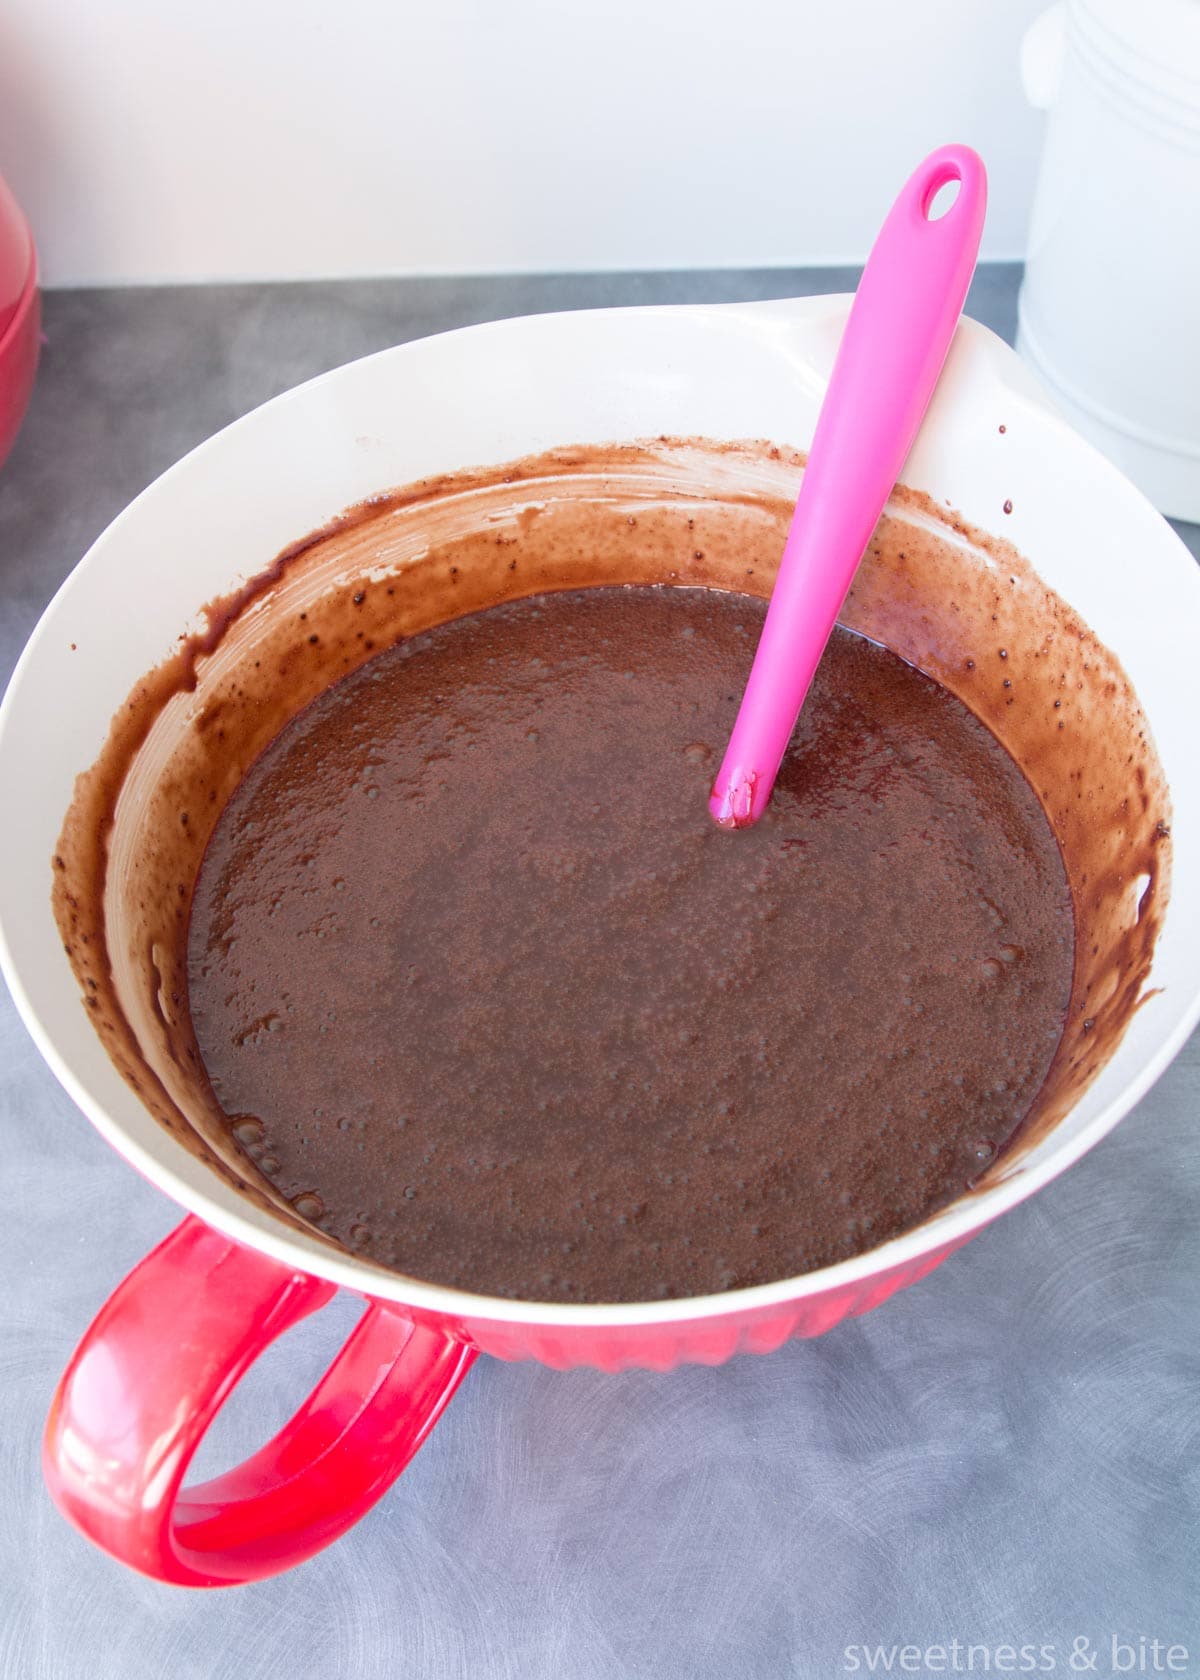 Chocolate mud cake batter in a large red bowl with a handle.